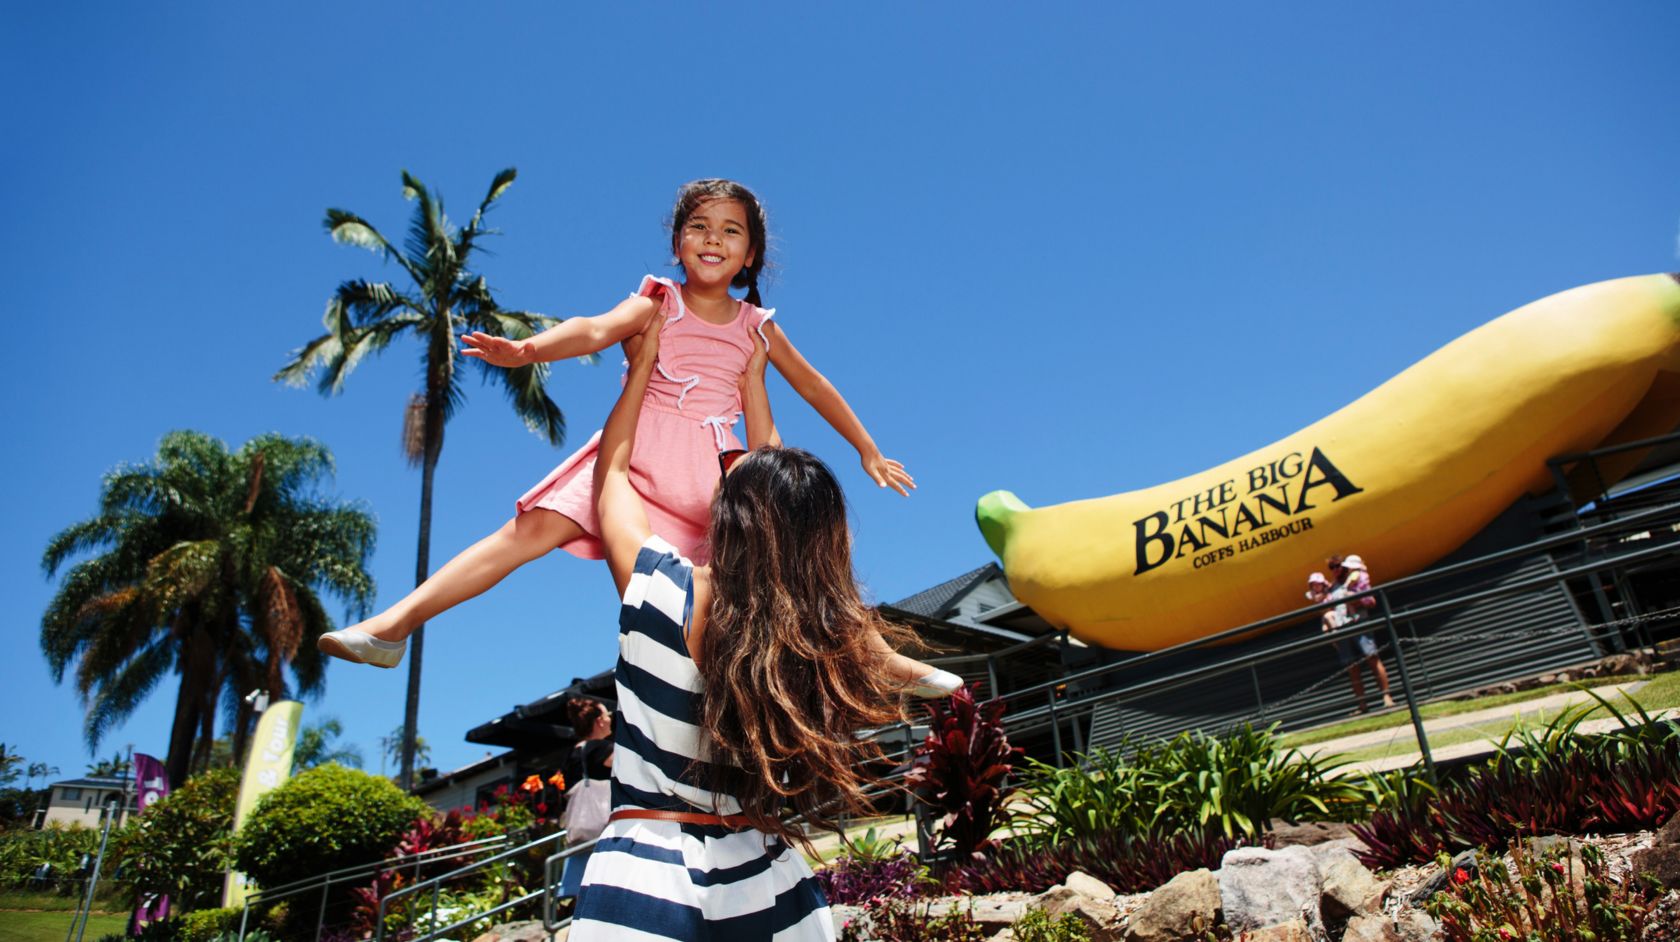 A Person Holding A Girl On at Big Banana